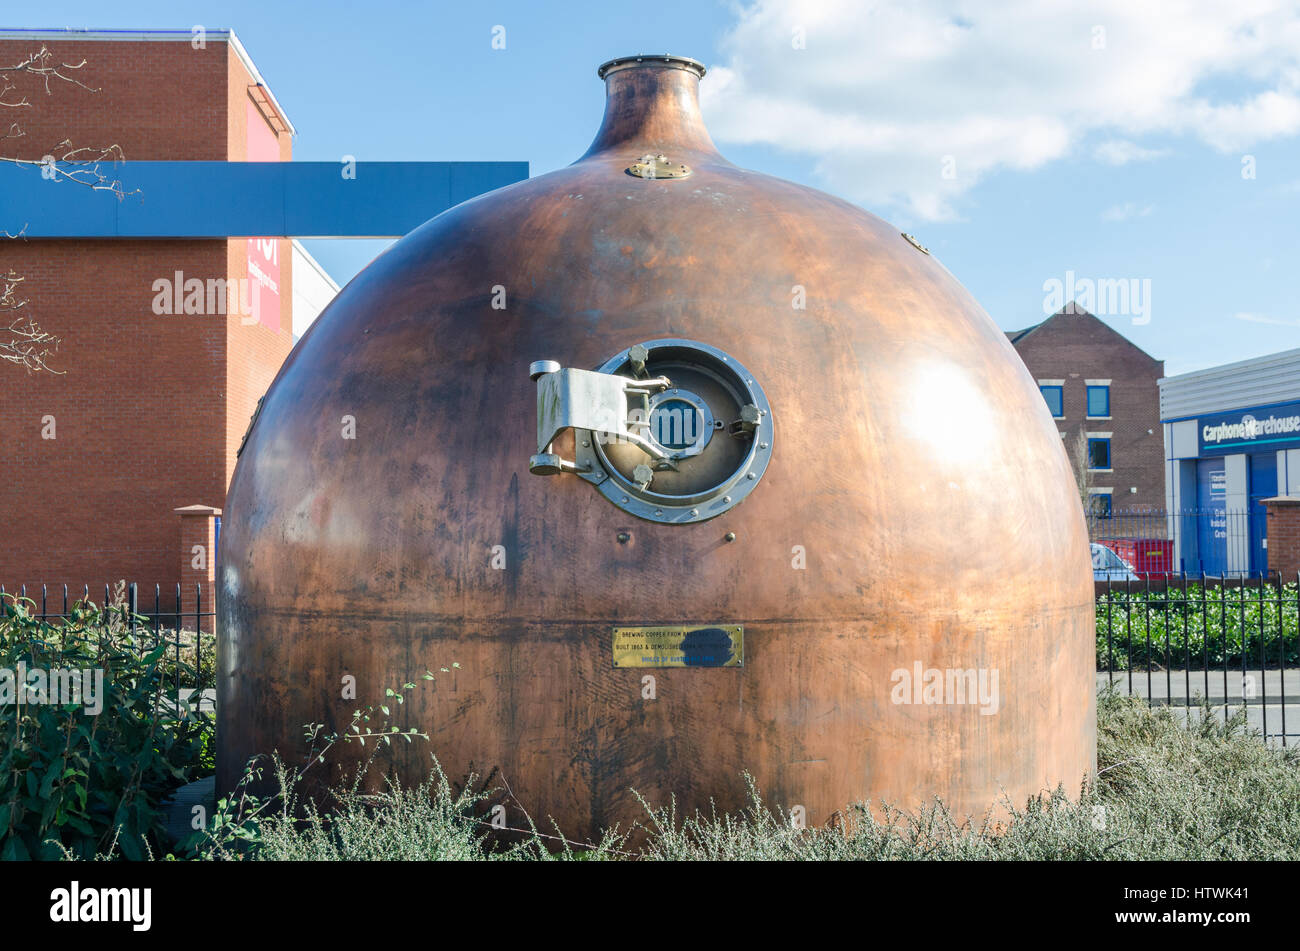 The National Brewery Centre in Burton-upon-Trent, Staffordshire Stock Photo